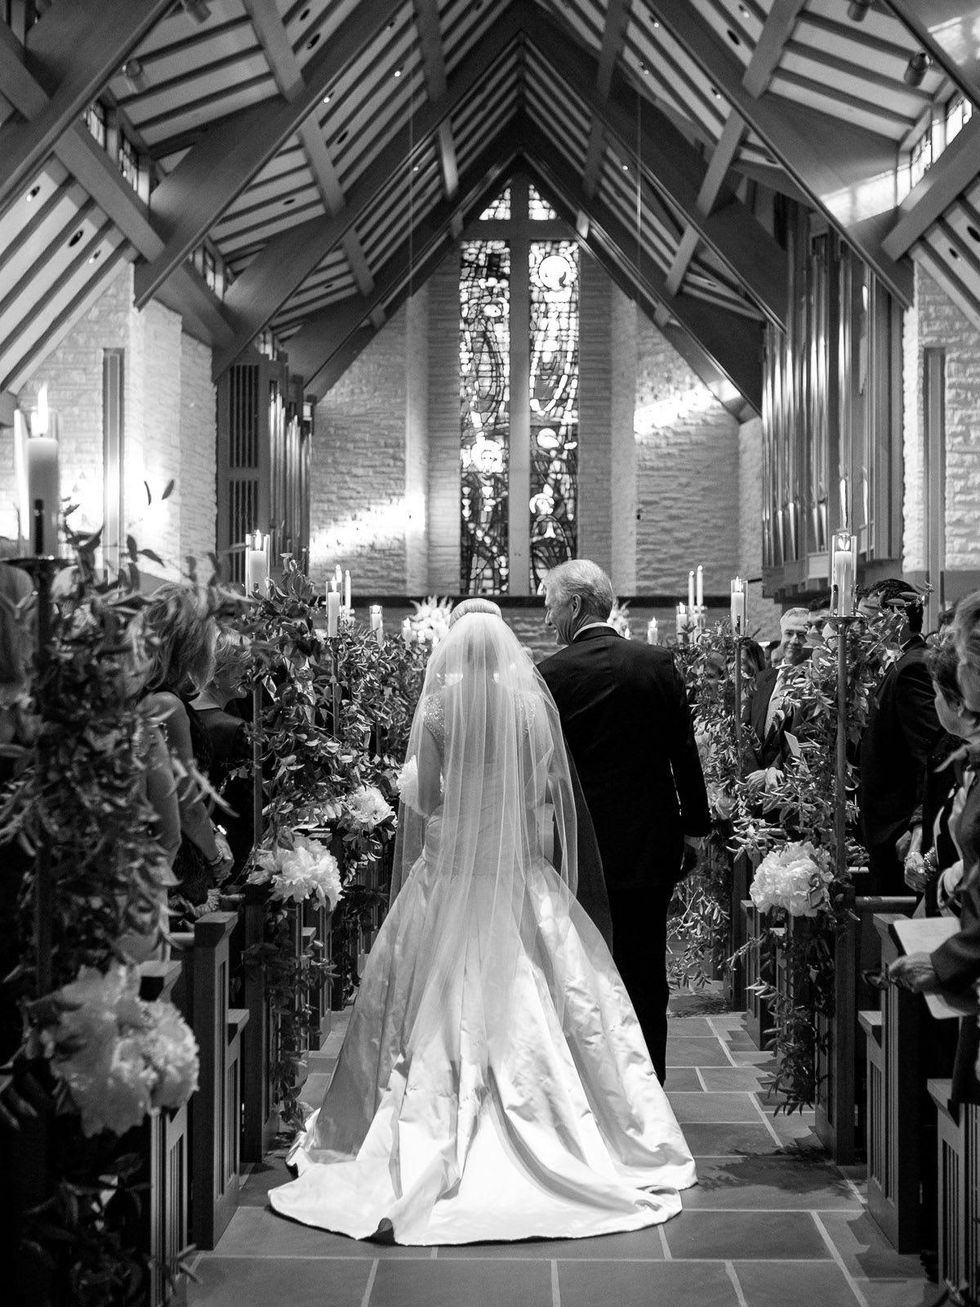 2, Wonderful Weddings, Leigh and Michael, Photos by Lacy Dagerath, More Than an Image Photography, February 2013